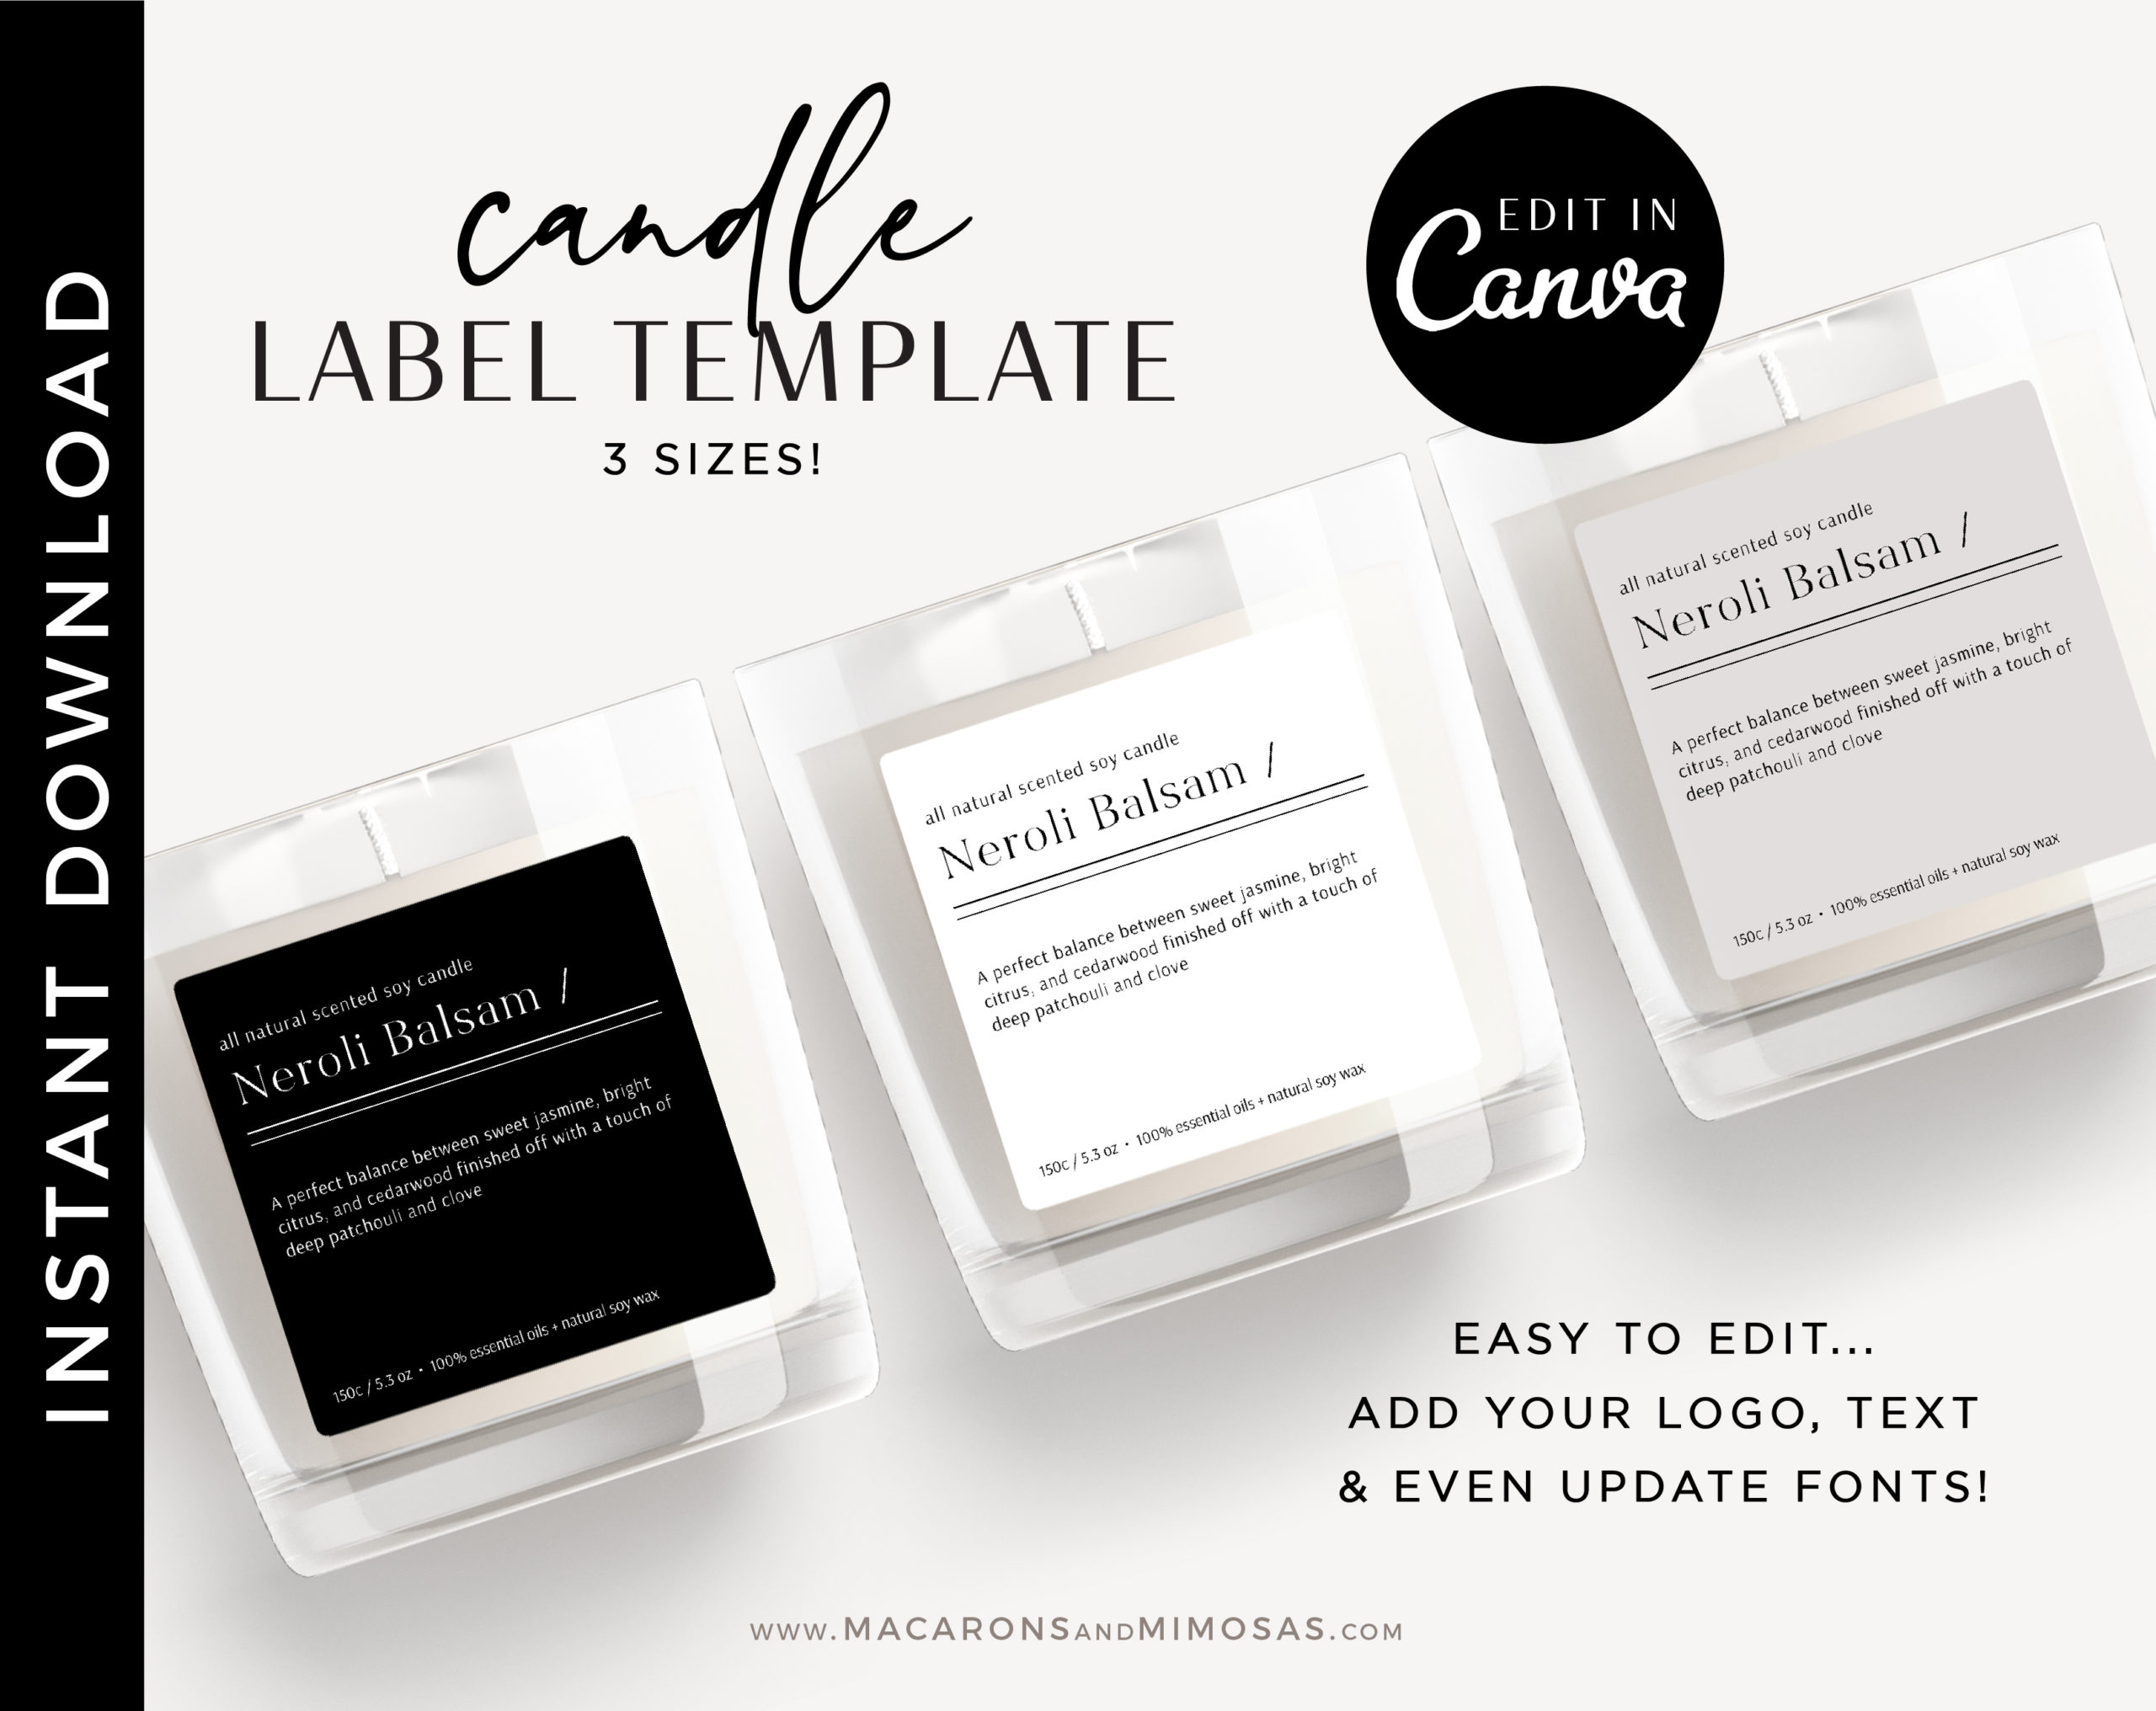 Abigale // Candle Label Template For Black And White Label Templates